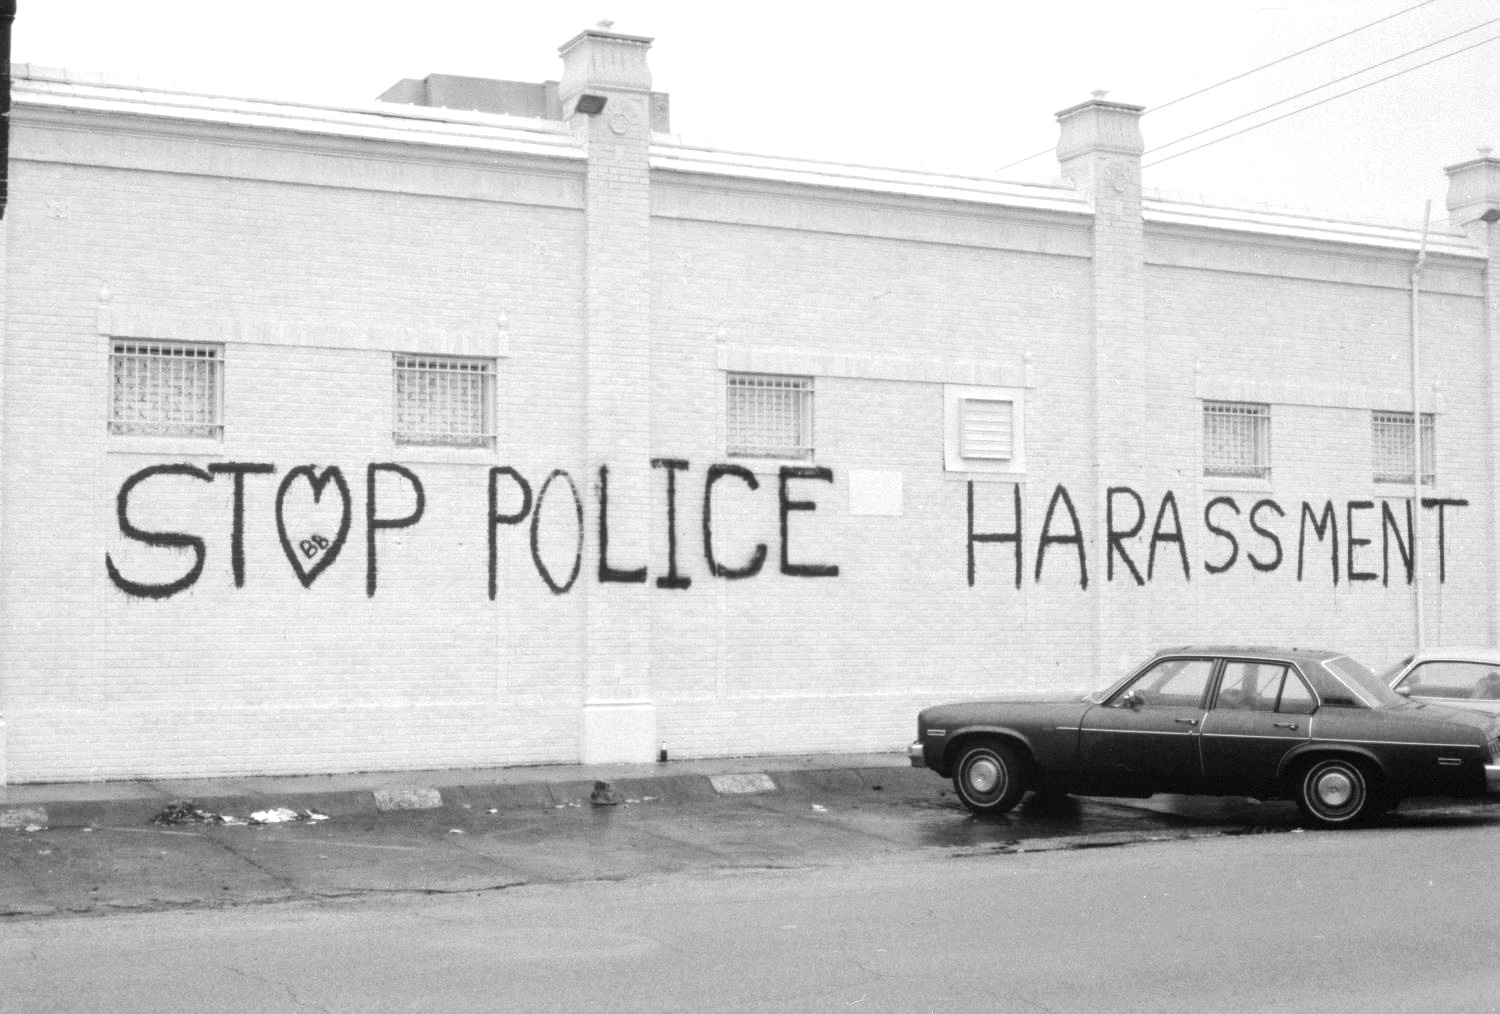 The side of a white brick building with graffiti on the side reading "Stop Police Harassment." The O in Stop is shaped like a heart. An old black car is parked near the wall. Before Lawrence, police raids and even brutality were commonplace in Texas.